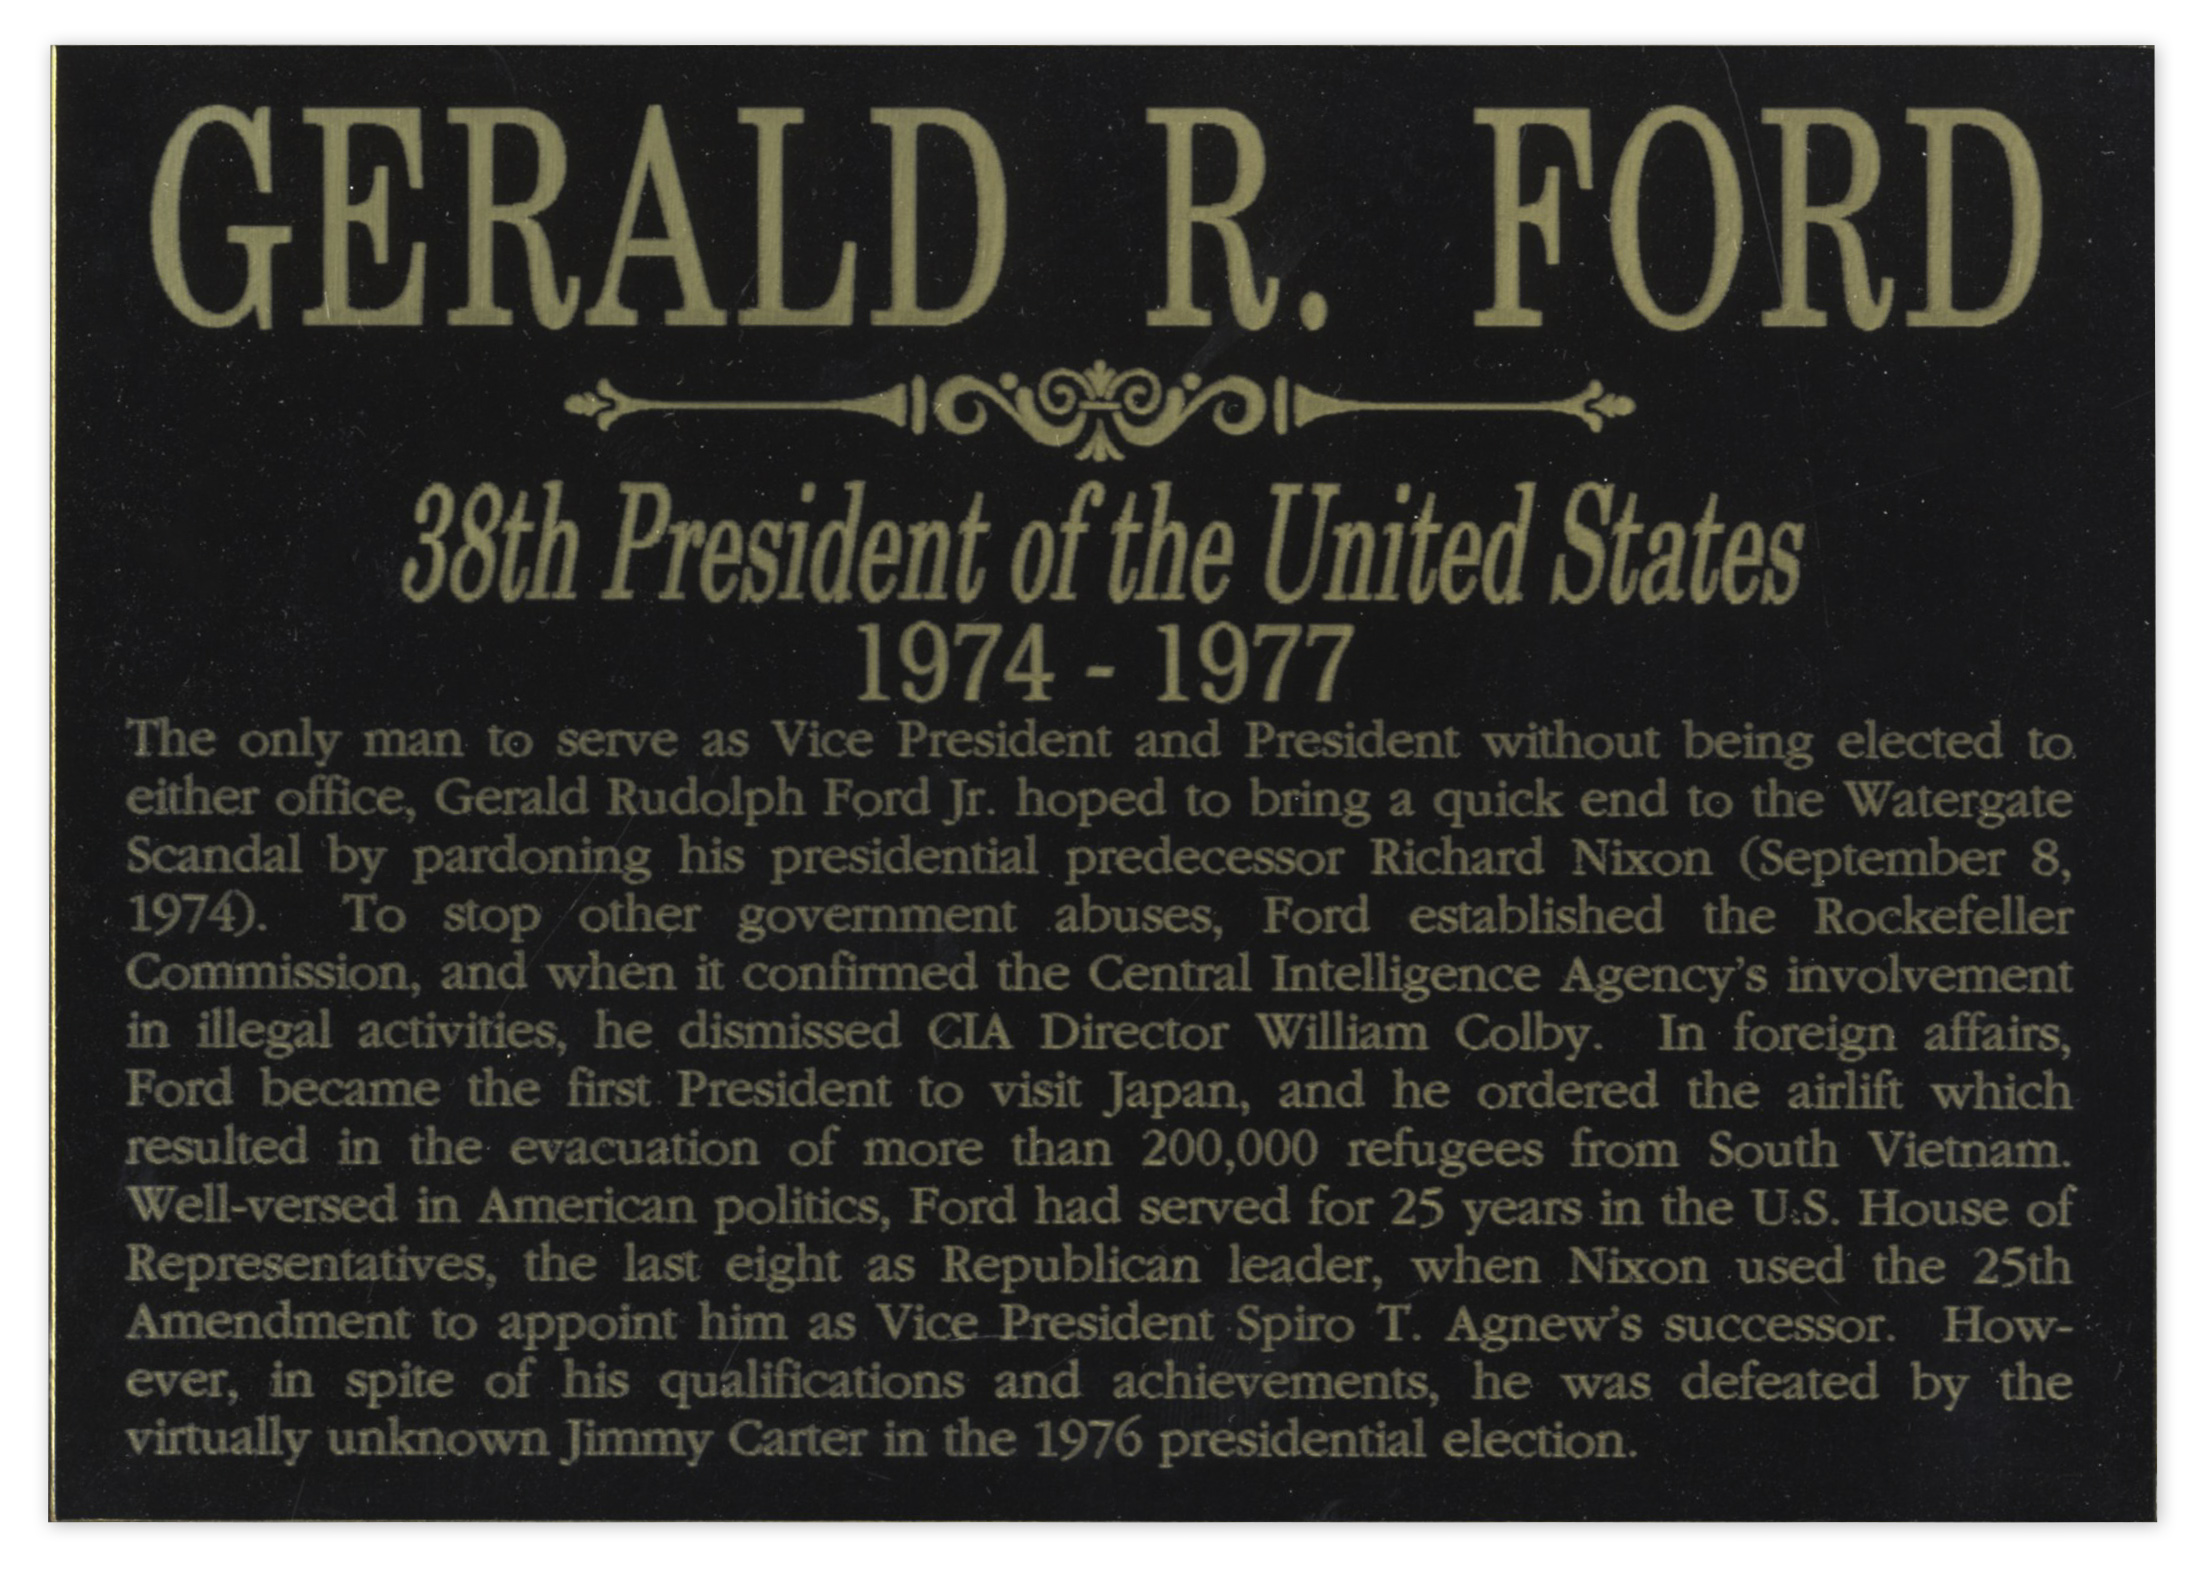 Gerald Ford Typed Letter Signed as President, Just After His Defeat in the 1976 Election -- ''... - Image 5 of 5